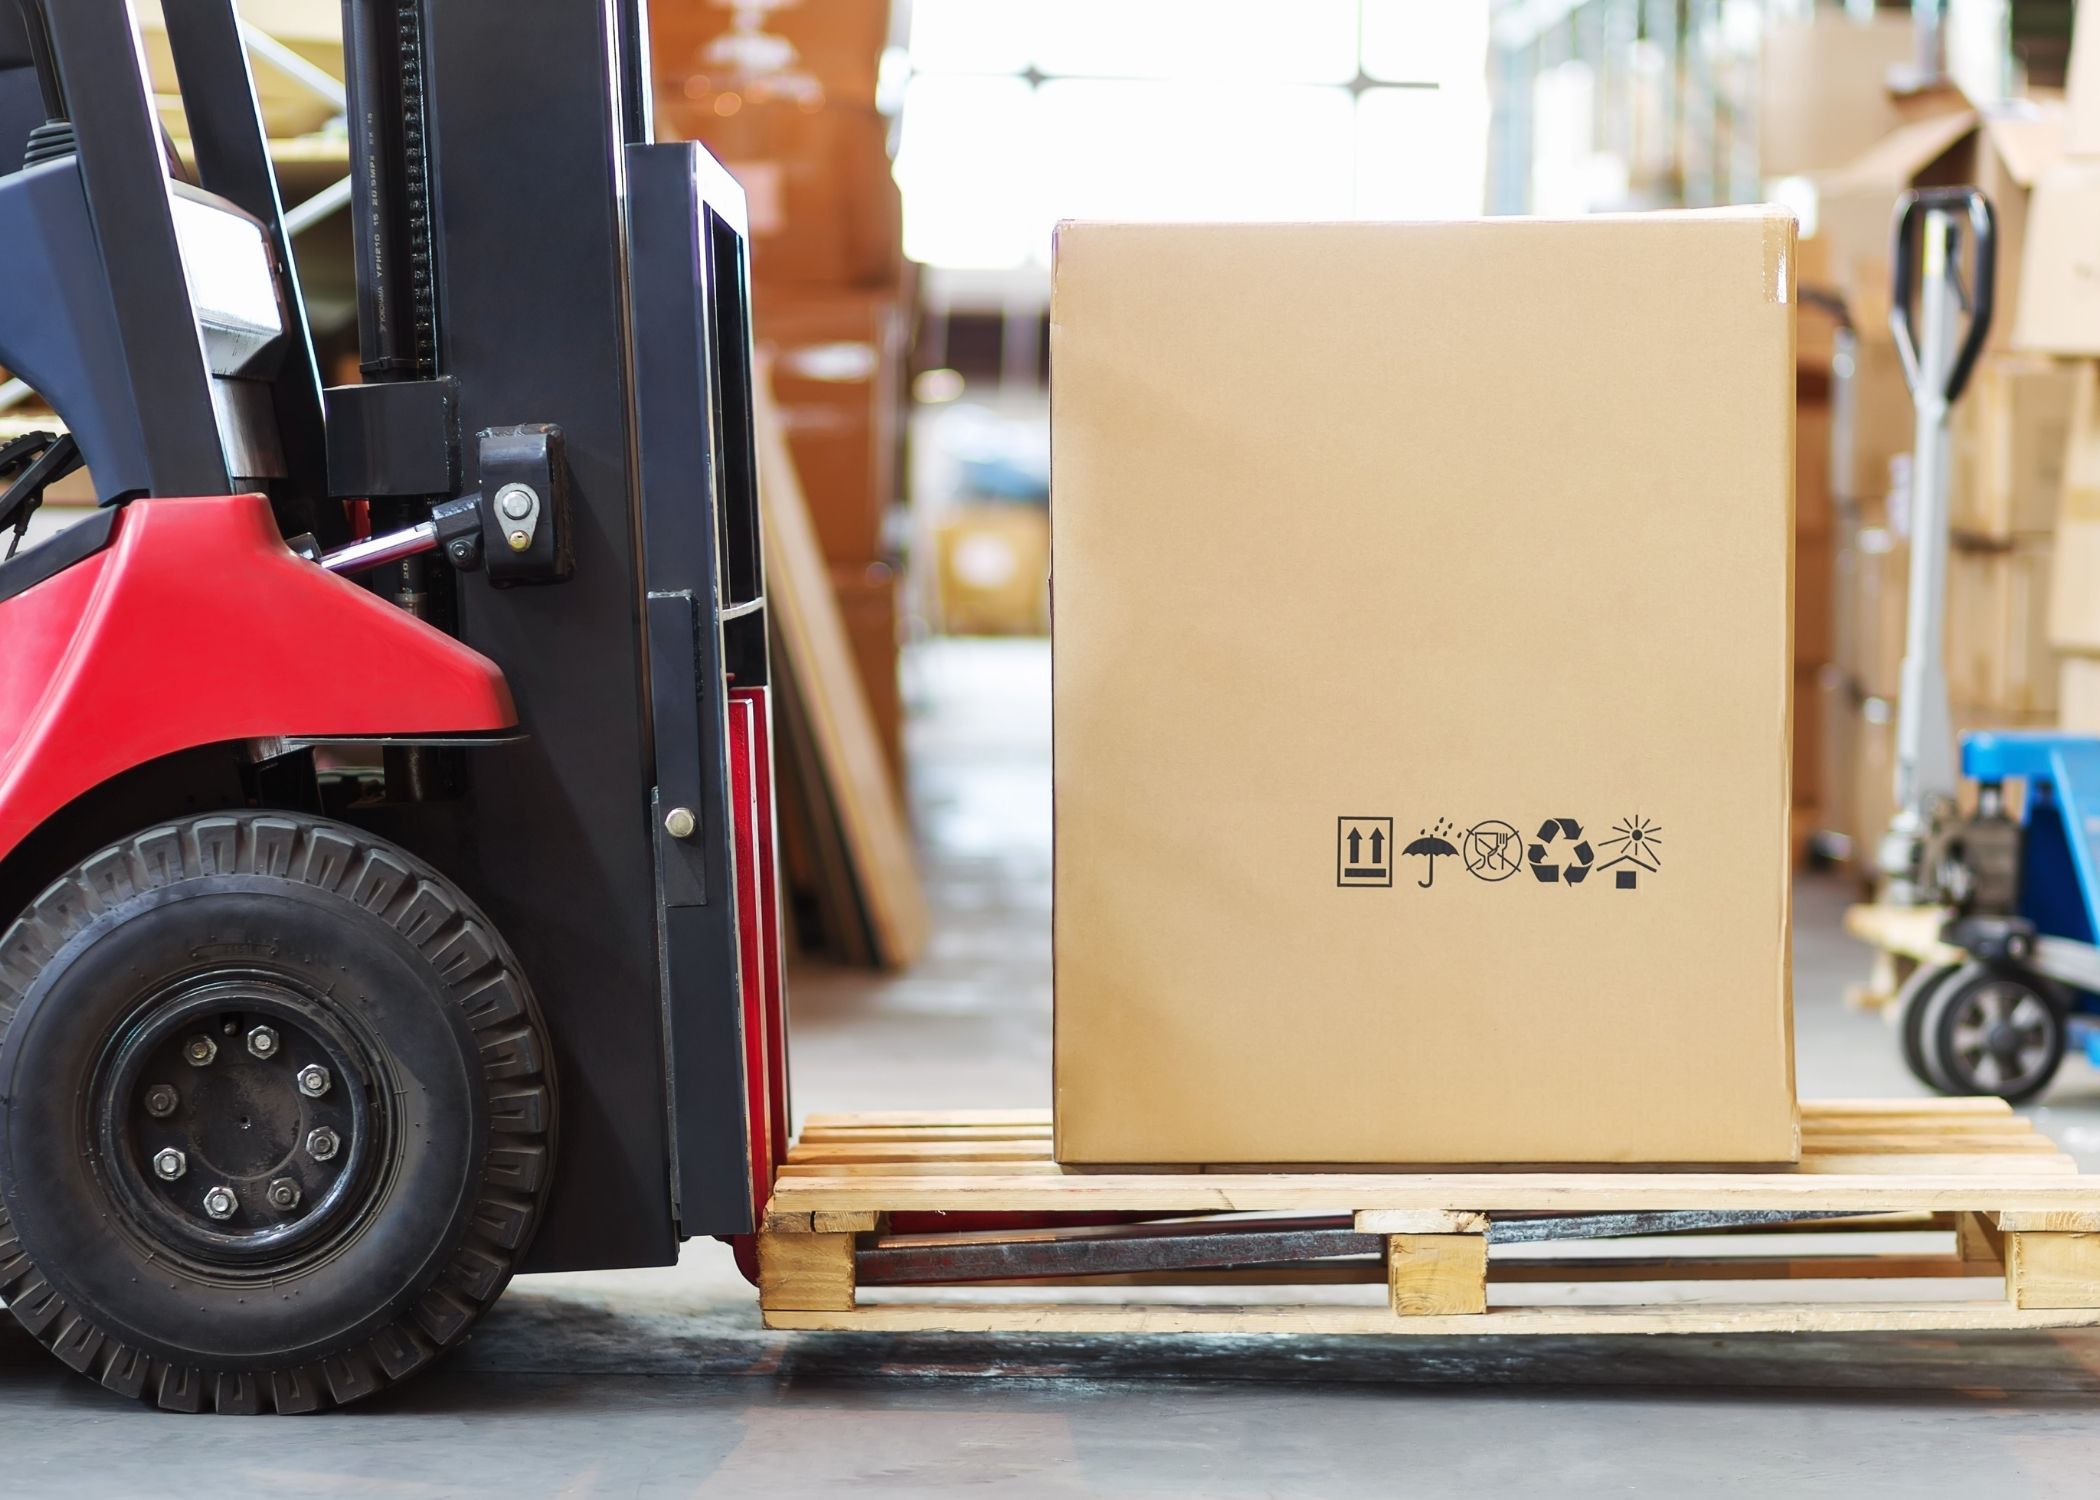 Questions To Ask Before Buying a Forklift for Your Business